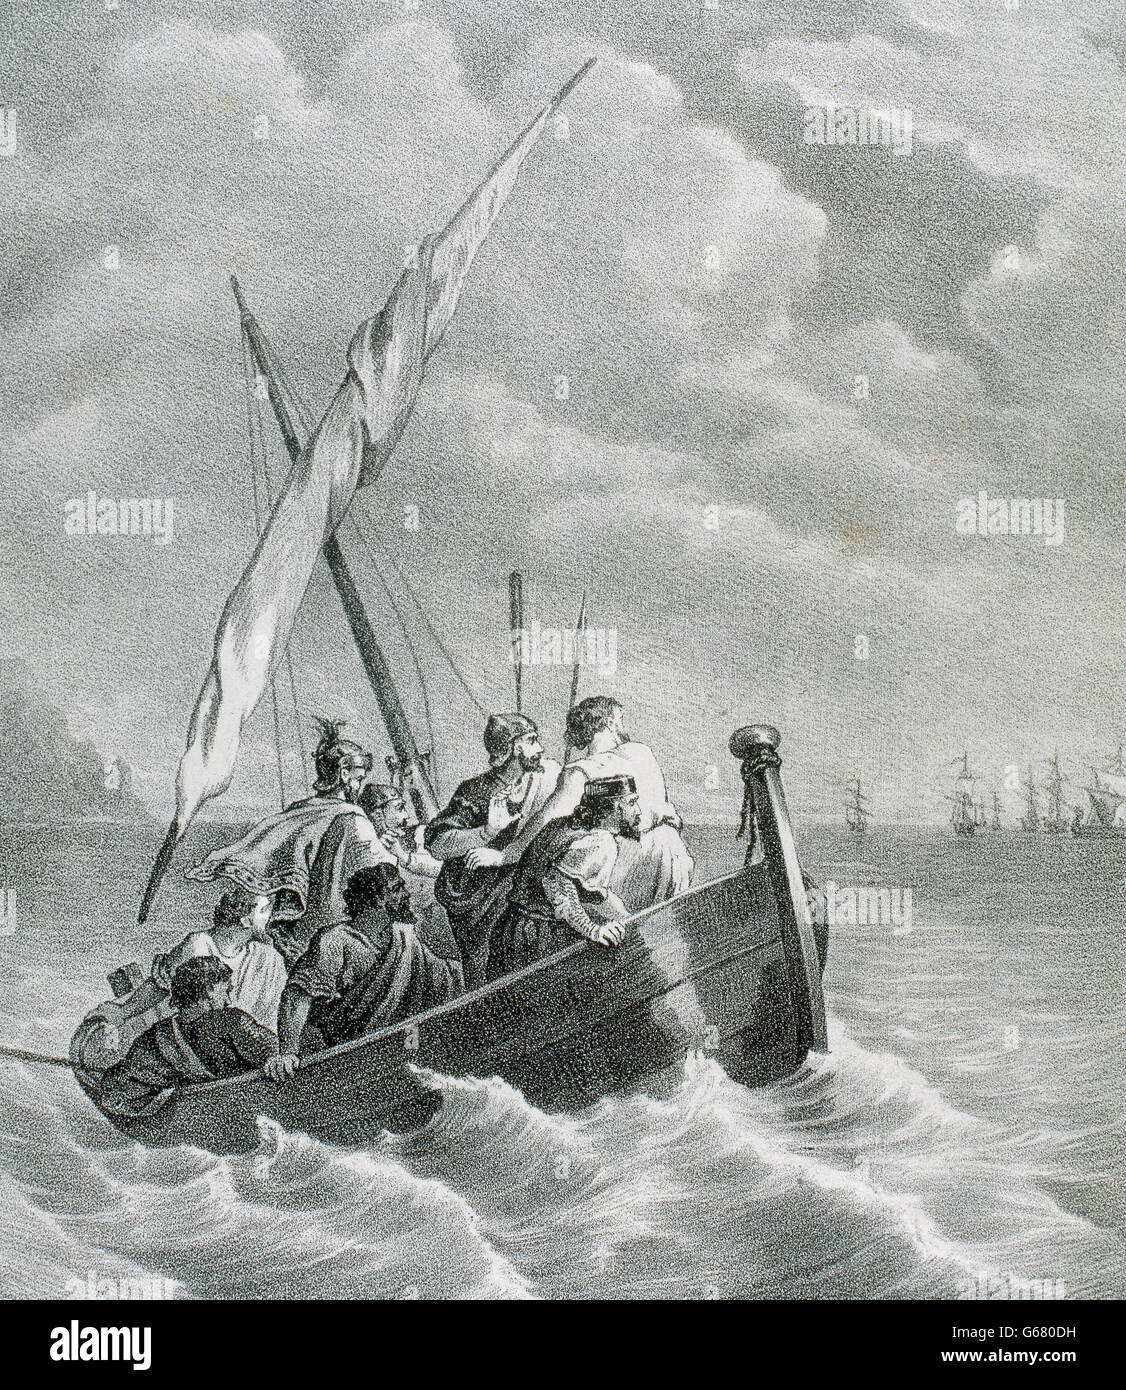 Count Borrell II of Barcelona, Girona, Ausona and Urgell (c. 915-992) escapes from Barcelona after the looting and burning of the city by Almanzor (985). Engraving, 19th century. Stock Photo